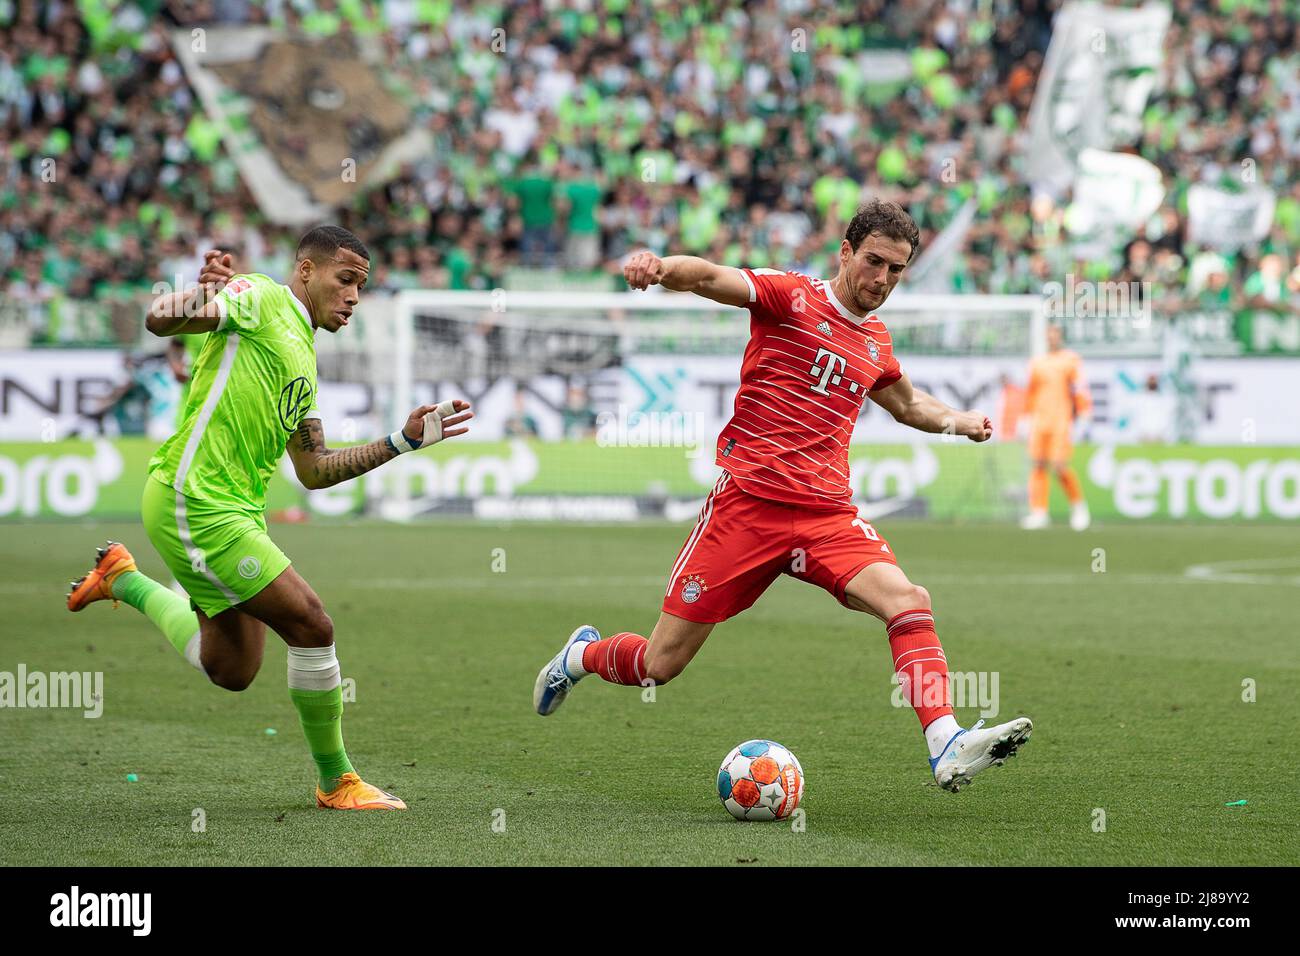 Wolfsburg, Germany. 14th May, 2022. Soccer: Bundesliga, VfL Wolfsburg - Bayern Munich, Matchday 34, Volkswagen Arena. Munich's Leon Goretzka (r) plays against Wolfsburg's Aster Vranckx. Credit: Swen Pförtner/dpa - IMPORTANT NOTE: In accordance with the requirements of the DFL Deutsche Fußball Liga and the DFB Deutscher Fußball-Bund, it is prohibited to use or have used photographs taken in the stadium and/or of the match in the form of sequence pictures and/or video-like photo series./dpa/Alamy Live News Stock Photo